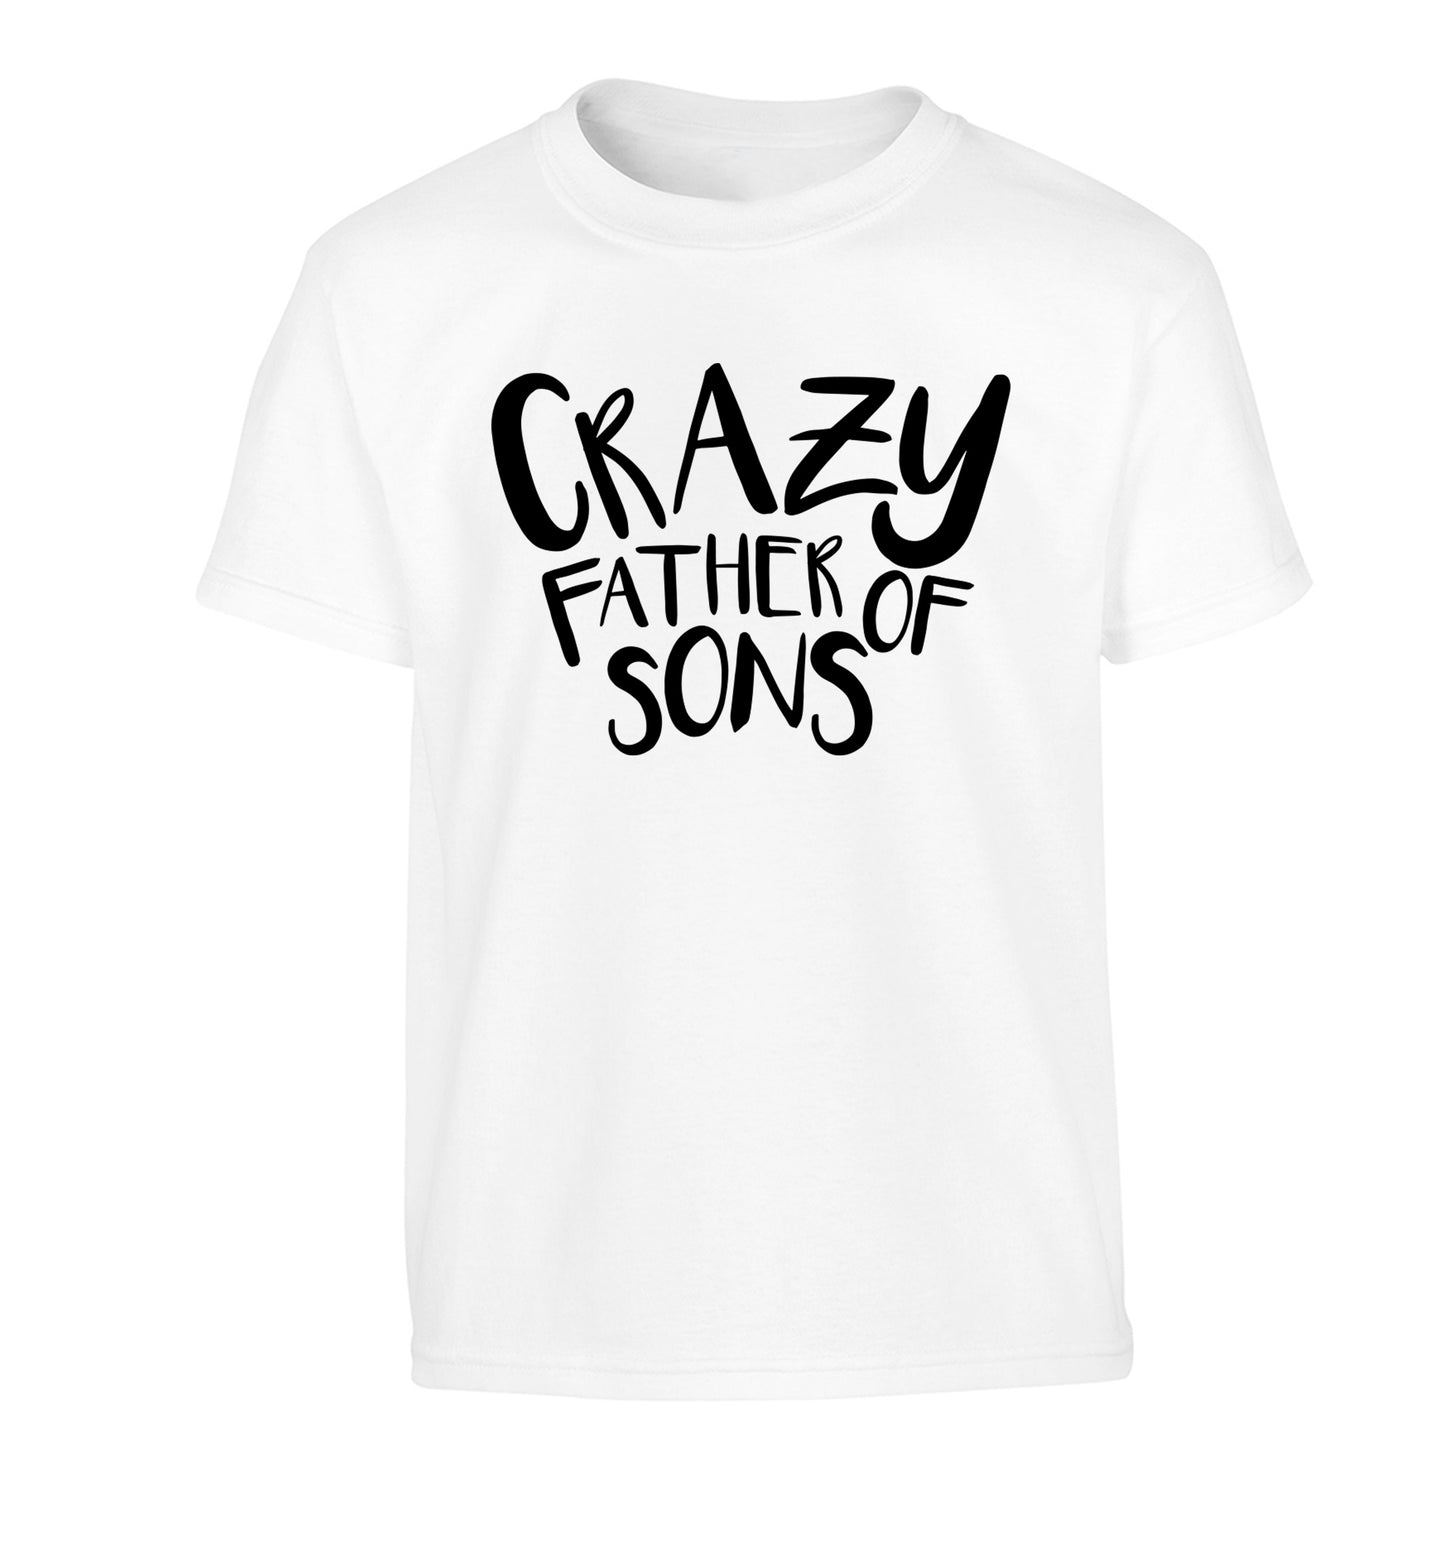 Crazy father of sons Children's white Tshirt 12-13 Years